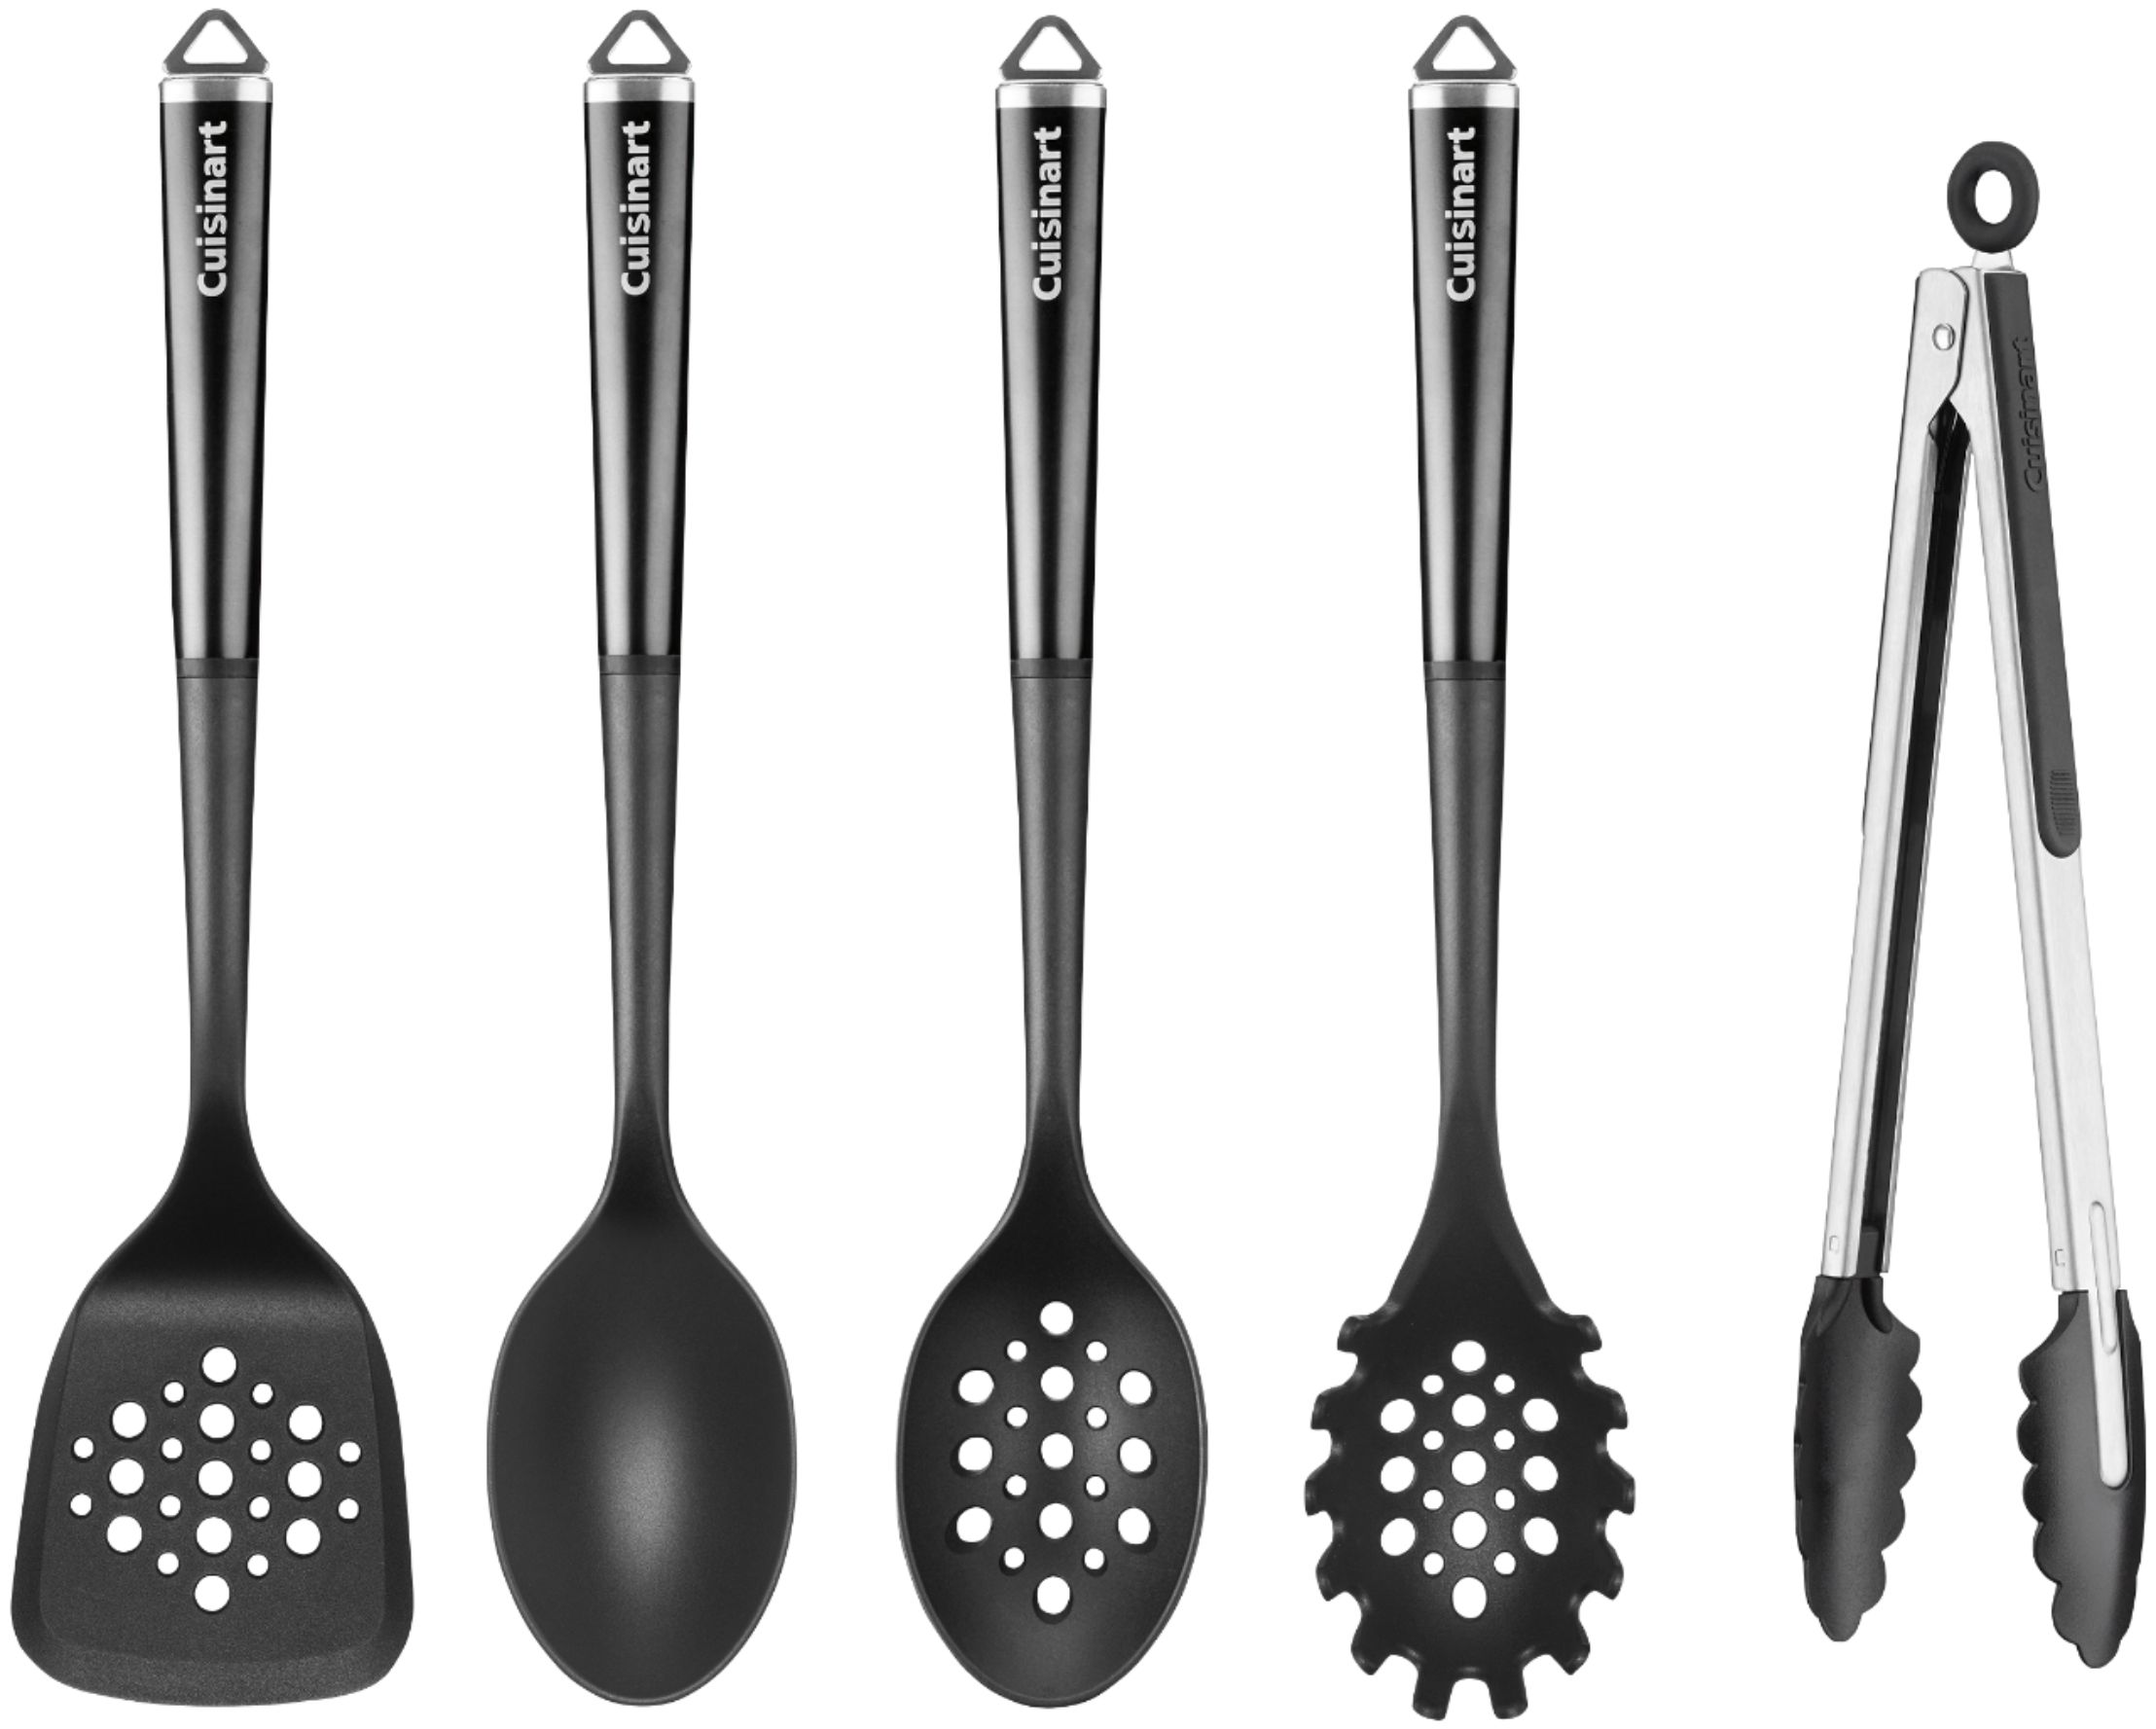 Angle View: Cuisinart - 5 pc FusionPro Tool Set - Stainless Steel